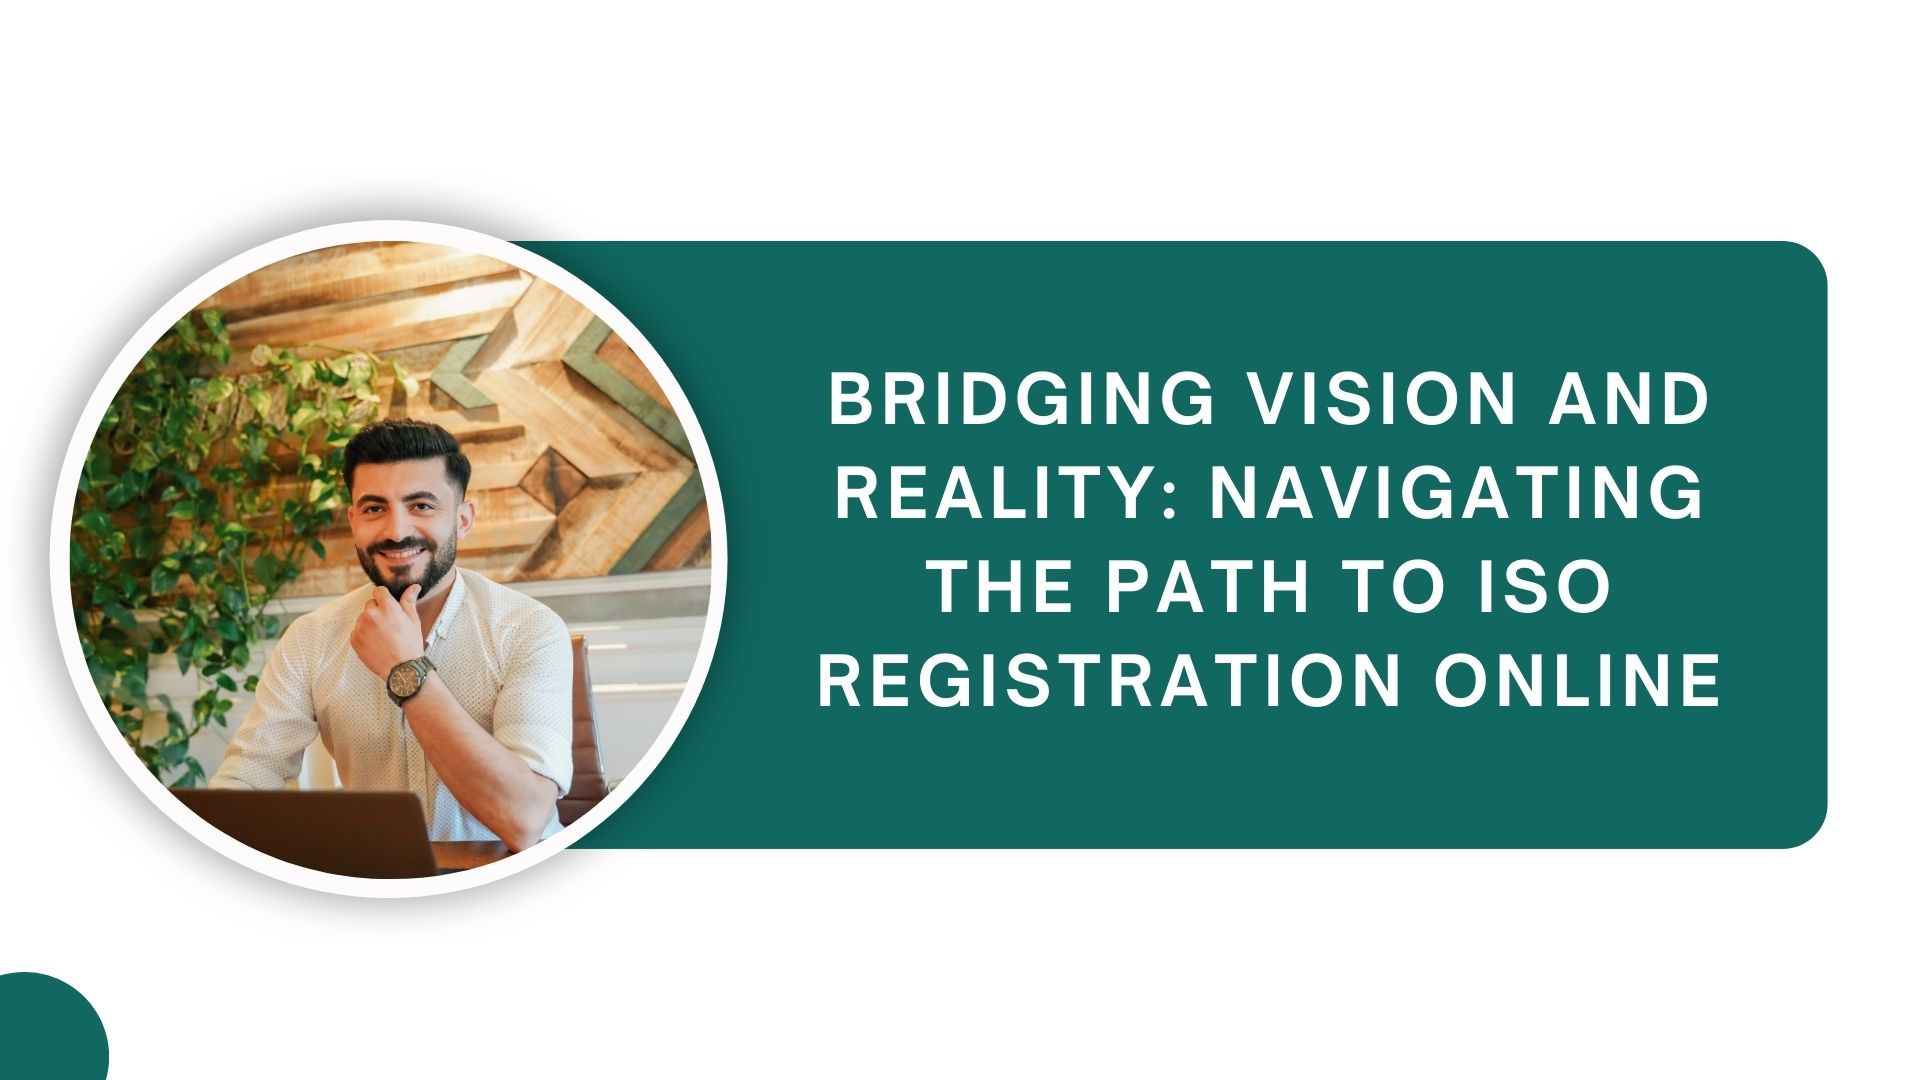 Bridging Vision and Reality: Navigating the Path to ISO Registration Online